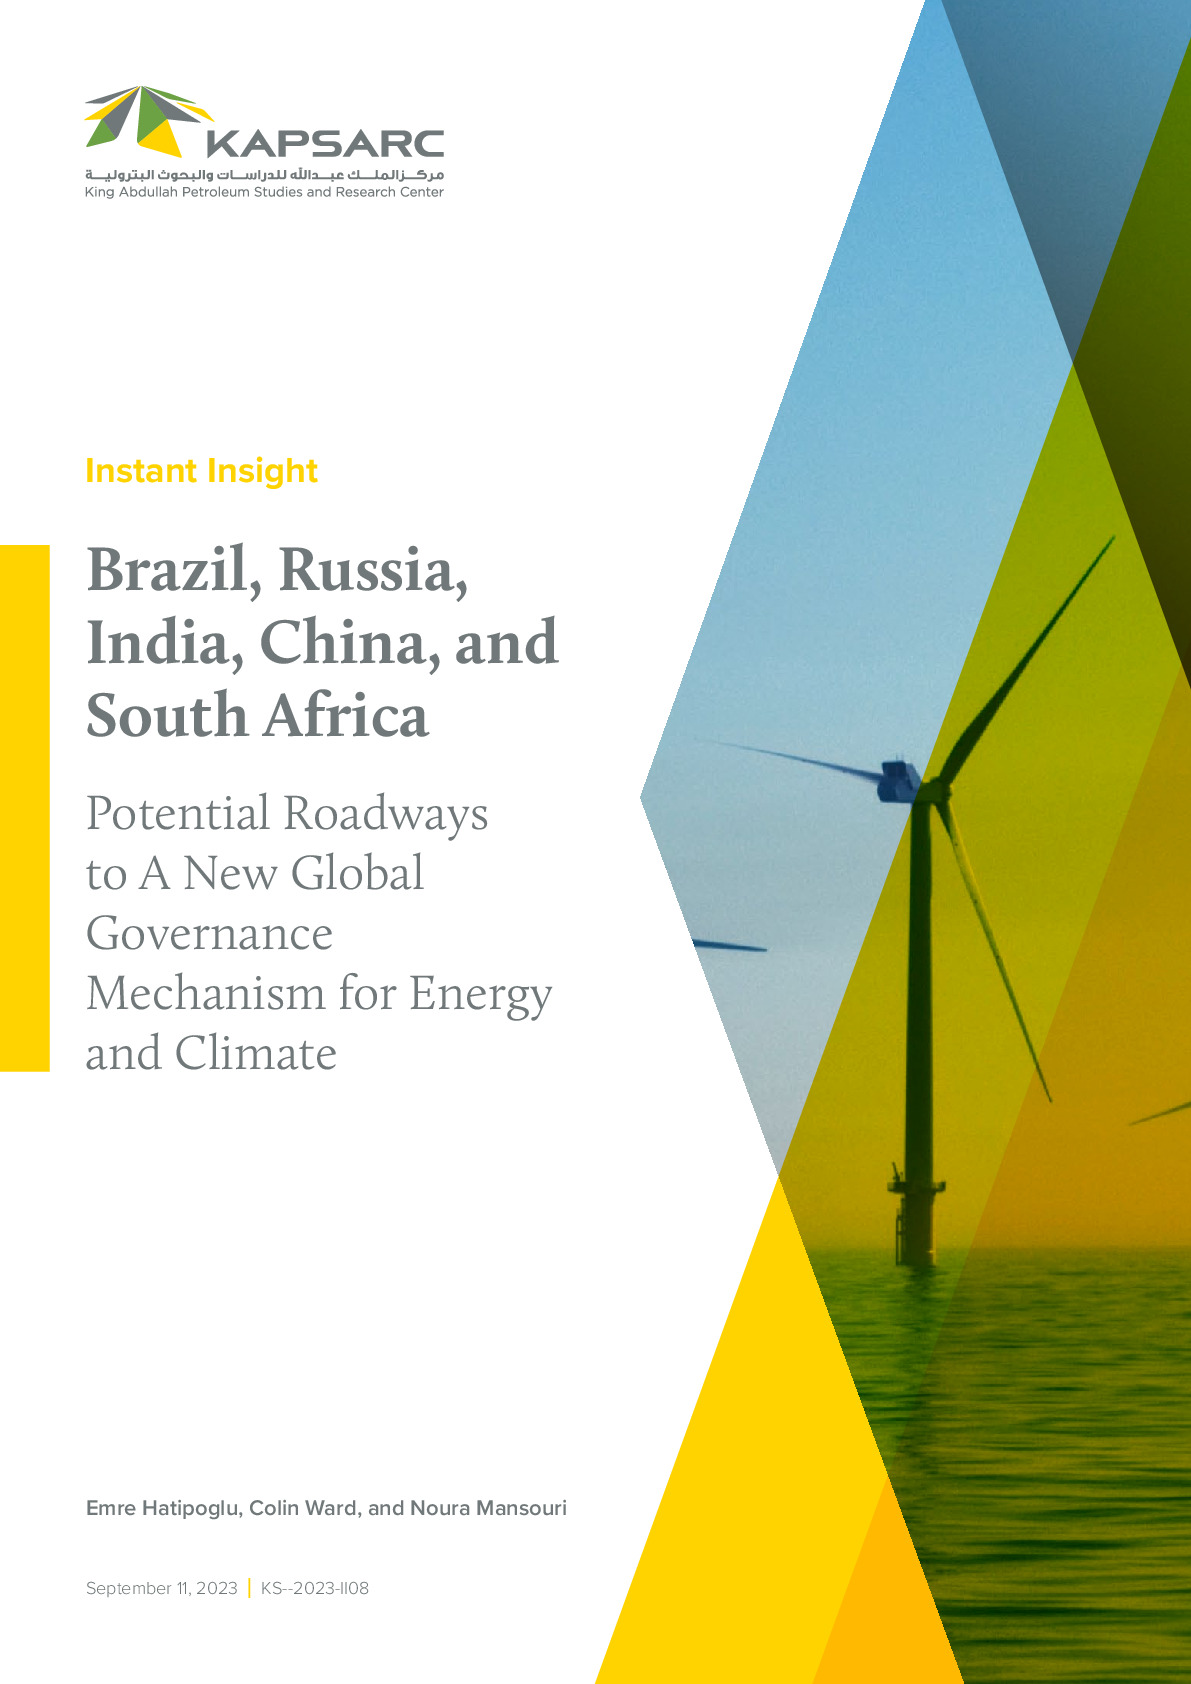 Brazil, Russia, India, China, and South Africa: Potential Roadways to A New Global Governance Mechanism for Energy and Climate